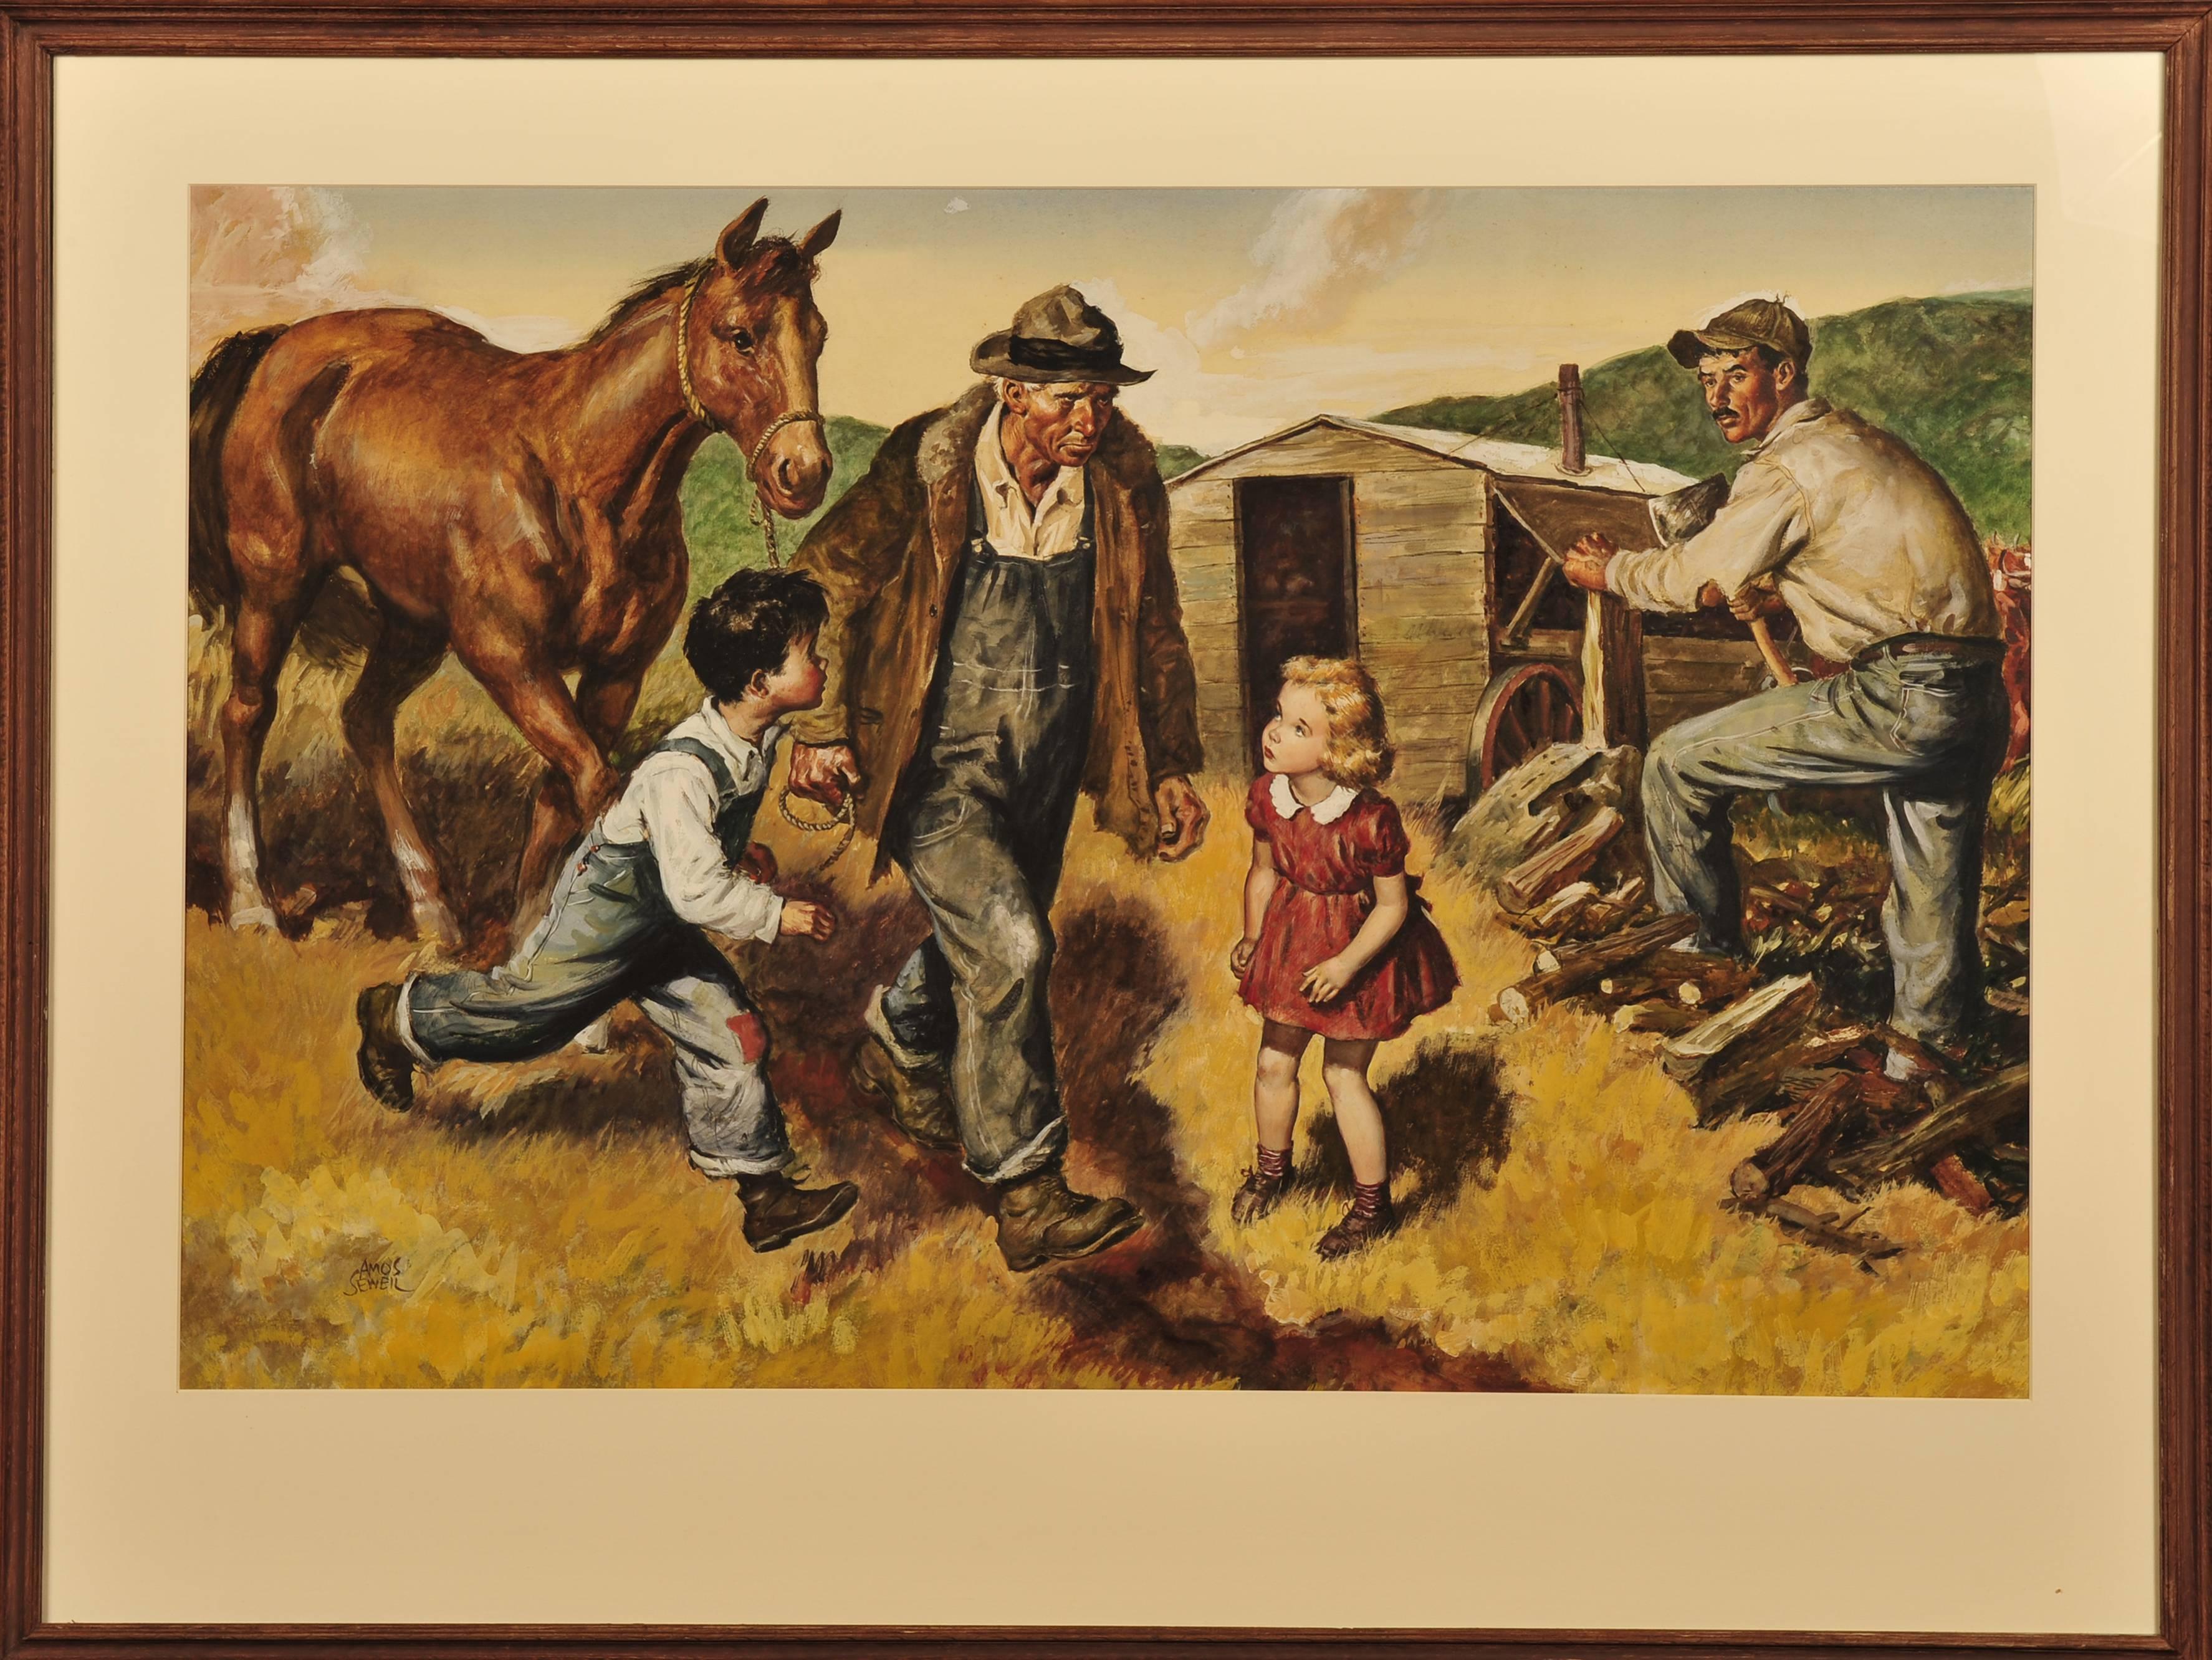 Man Leading Horse - Painting by Amos Sewell